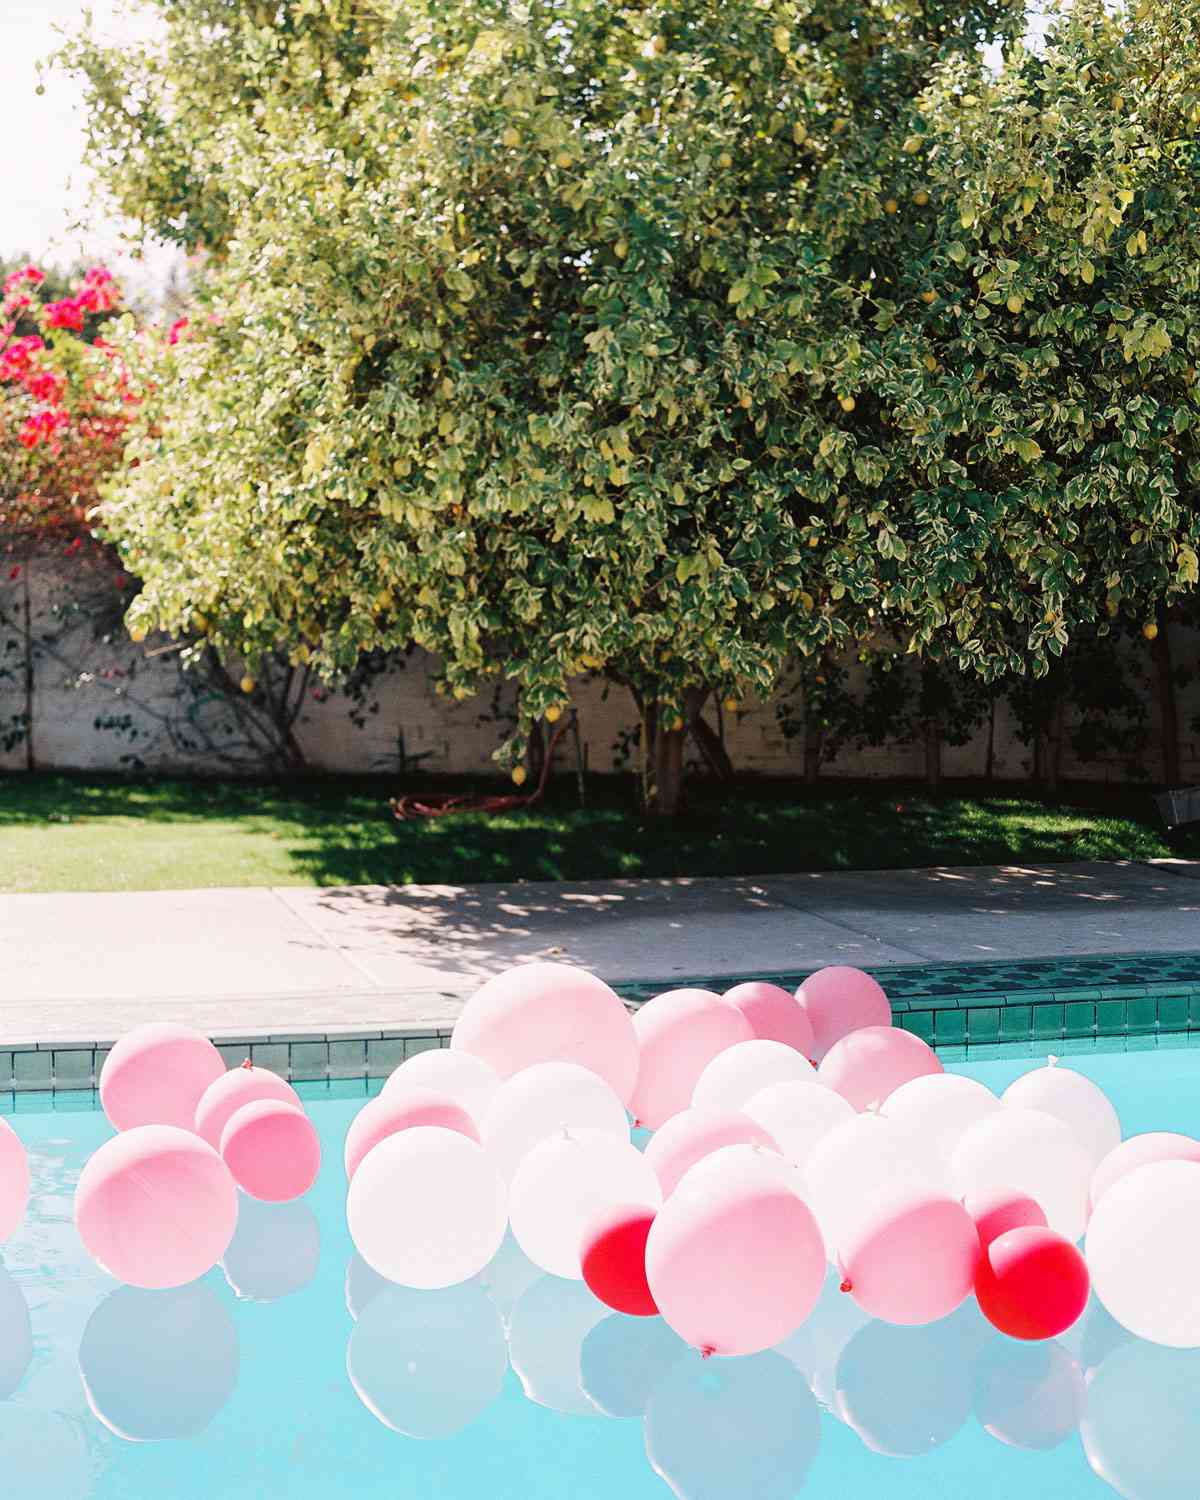 Balloons in the Pool